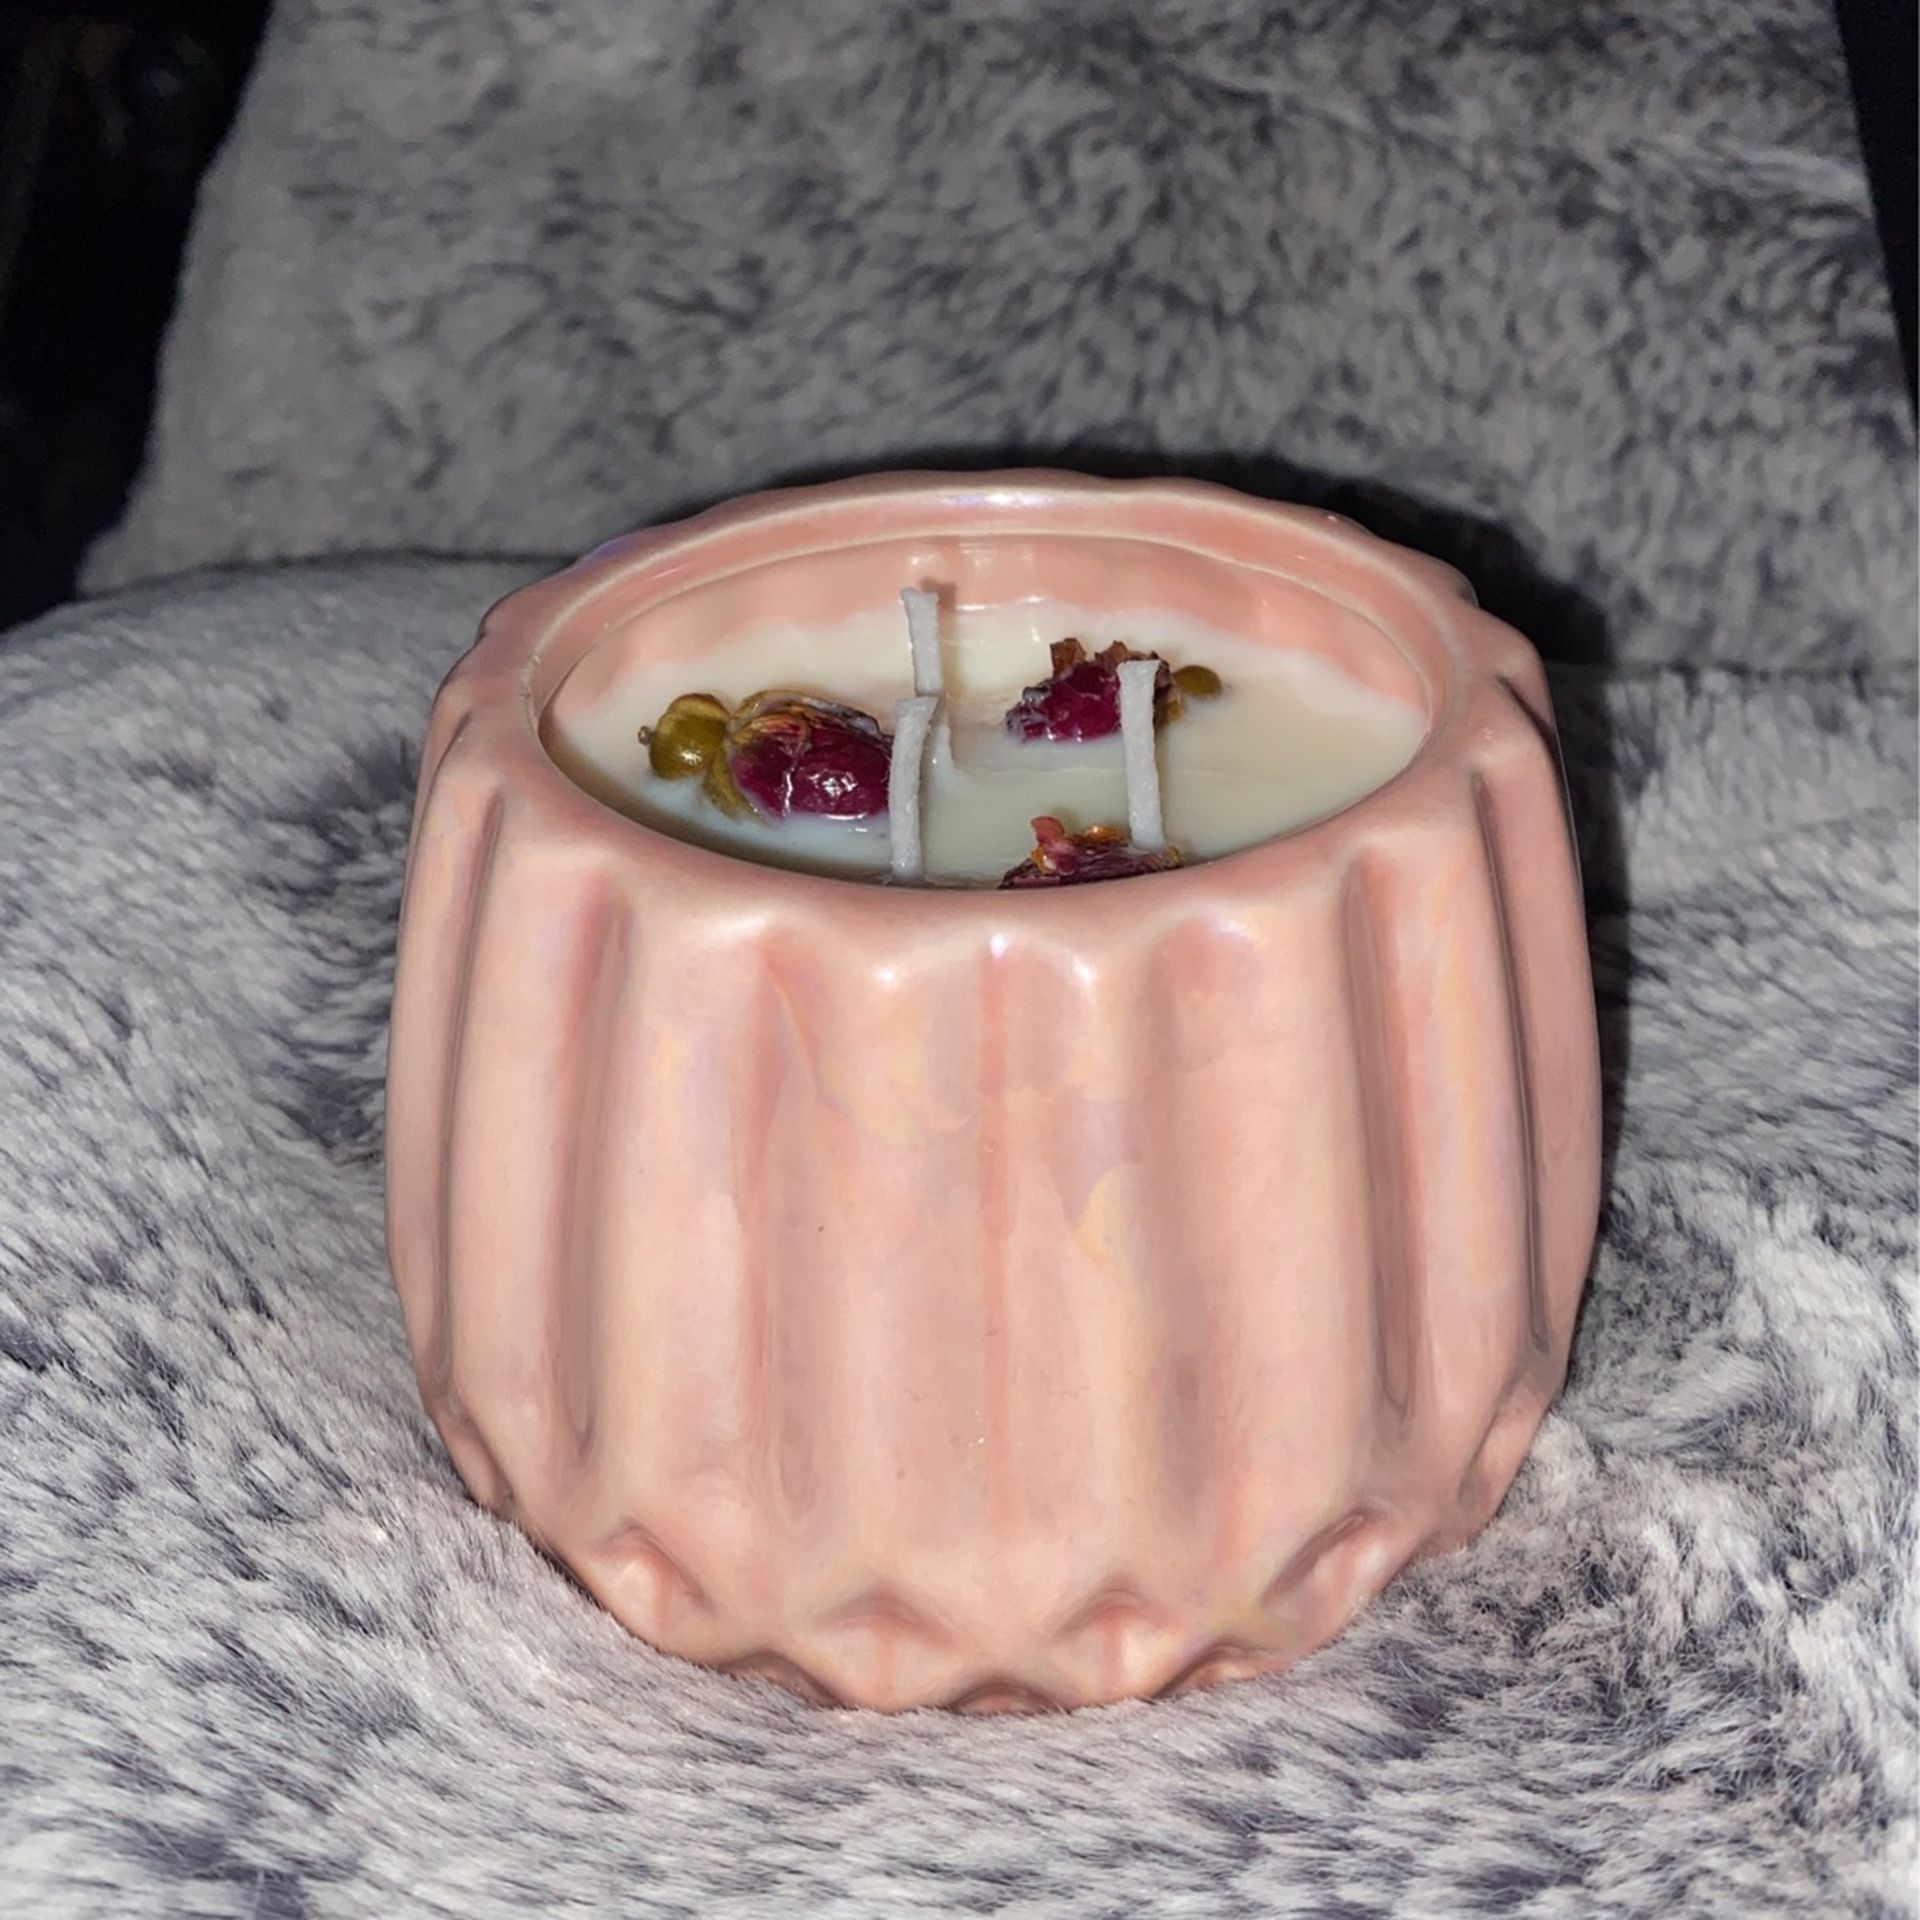 Rose Scented Candle